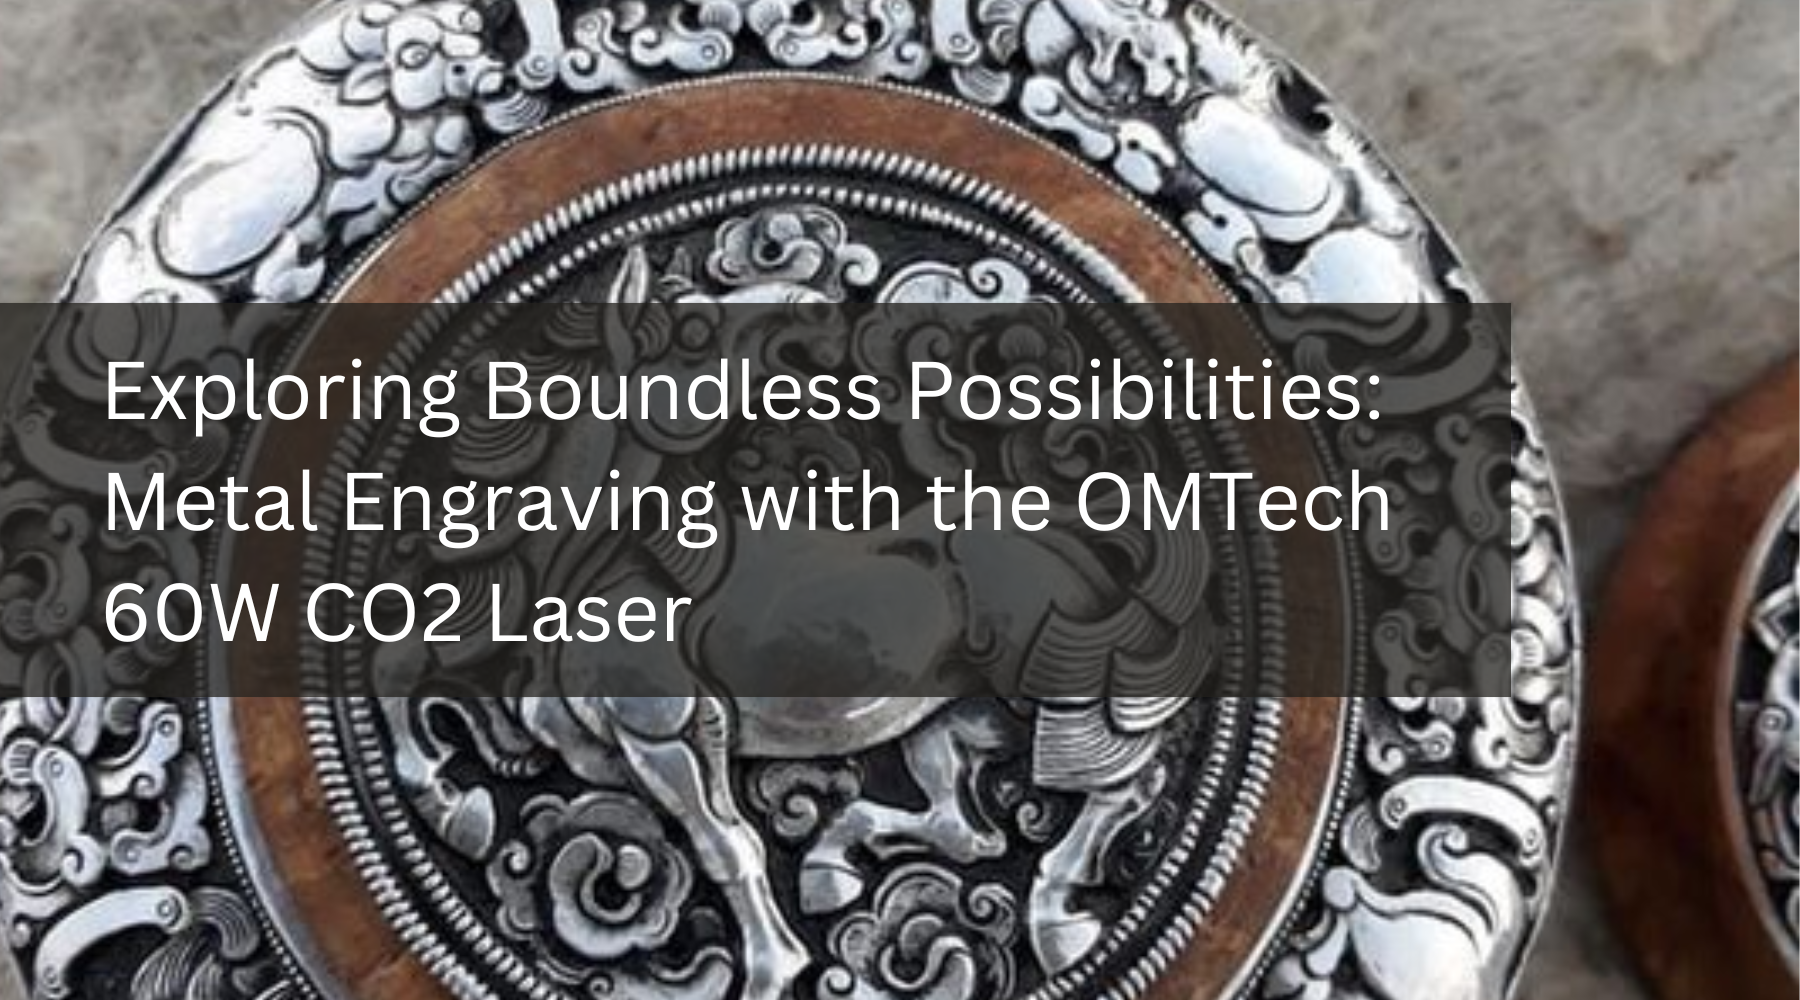 Exploring Boundless Possibilities: Metal Engraving with the OMTech 60W CO2 Laser